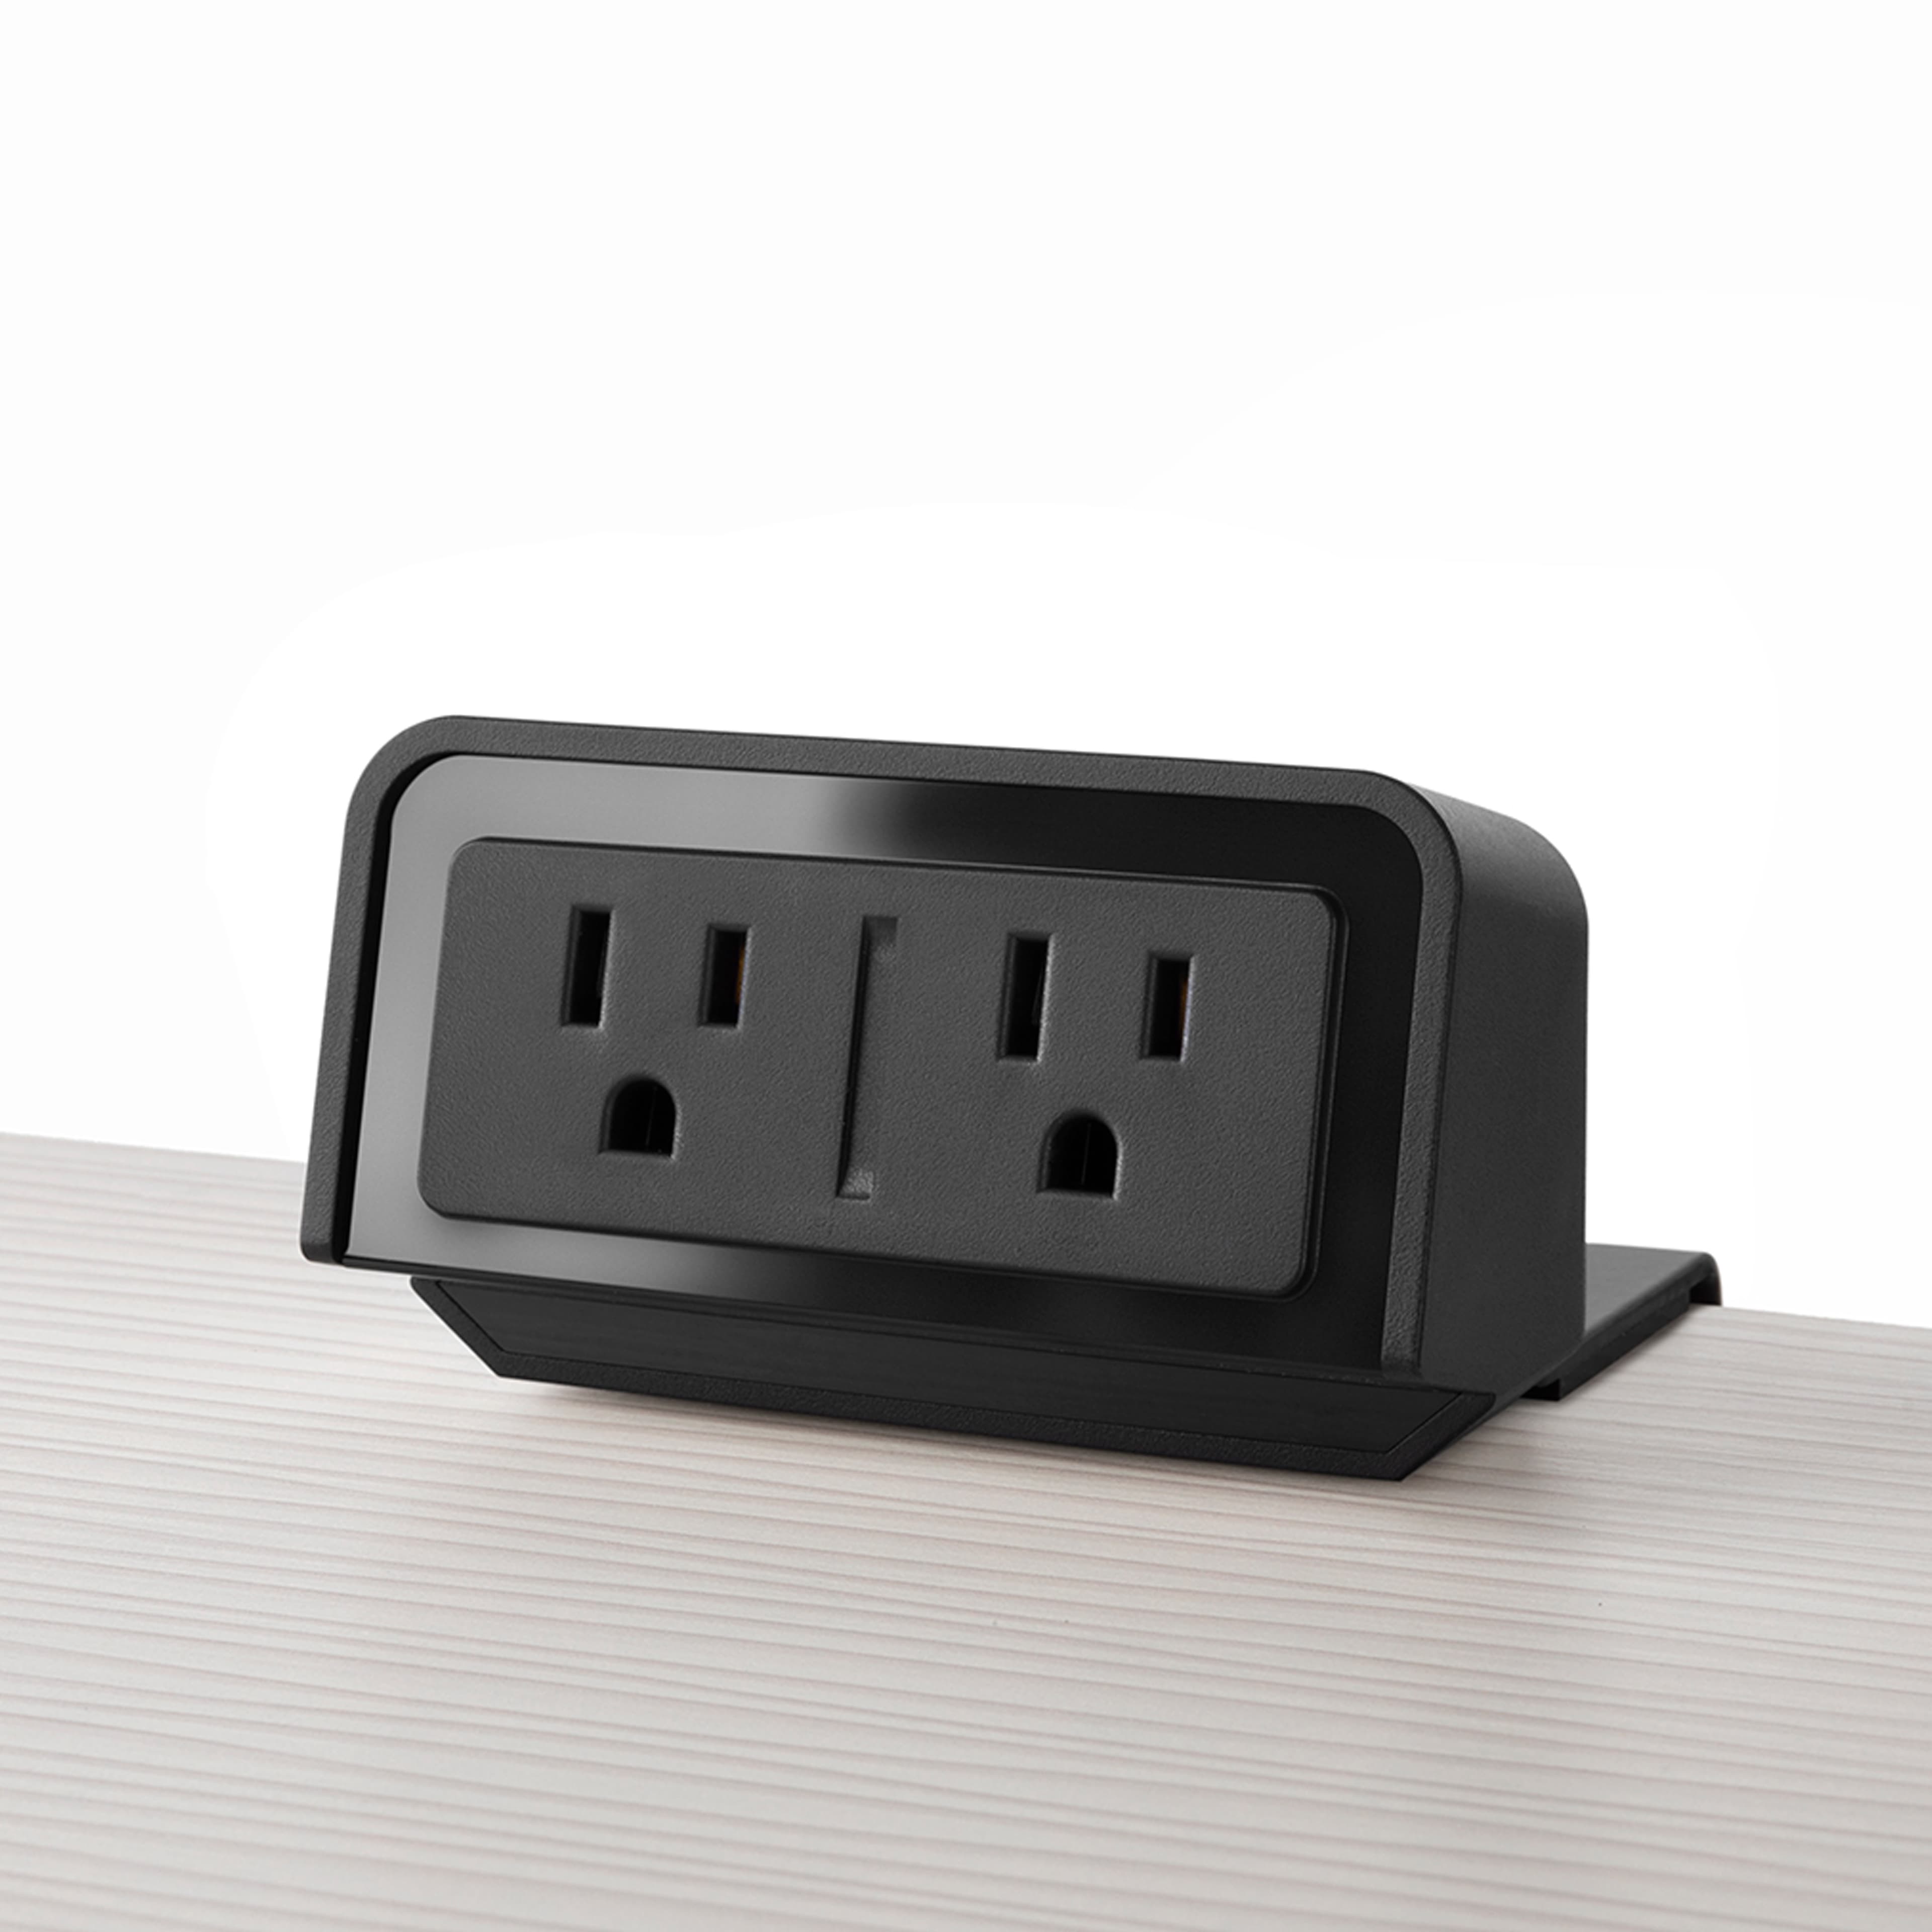 SitOnIt Seating, Accessories, Charge up (to keep up) with your day ahead. EON eliminates the struggle of finding an outlet